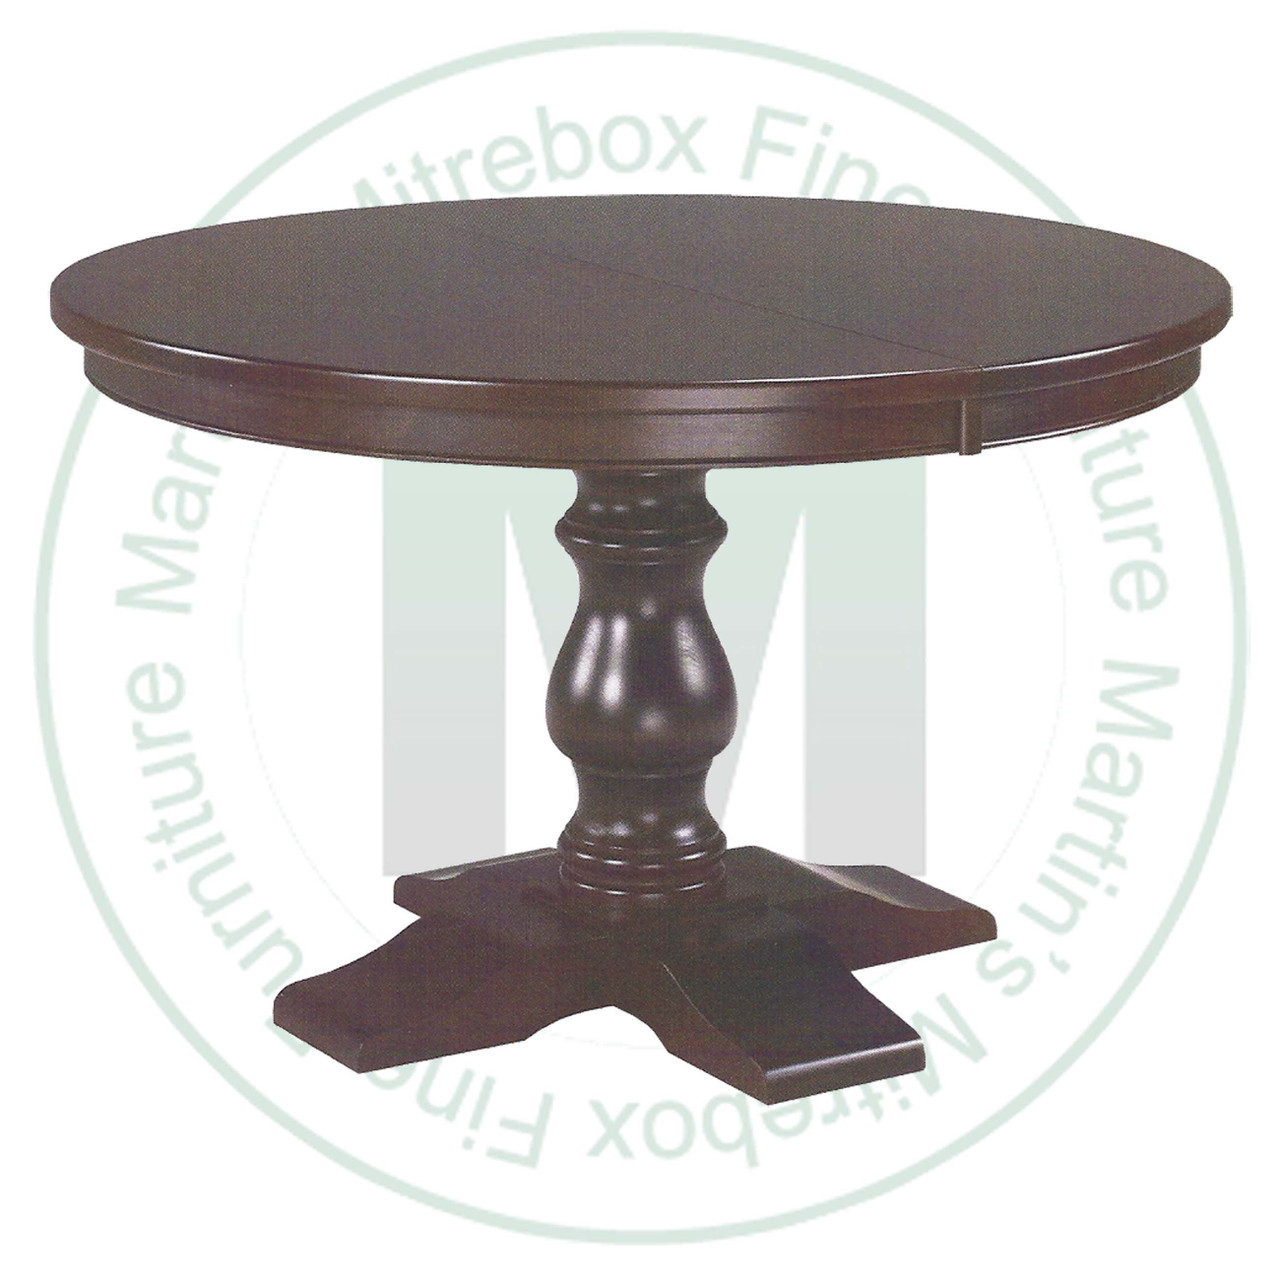 Oak Savannah Single Pedestal Table 36''D x 48''W x 30''H Round Solid Table. Table Has 1'' Thick Top.